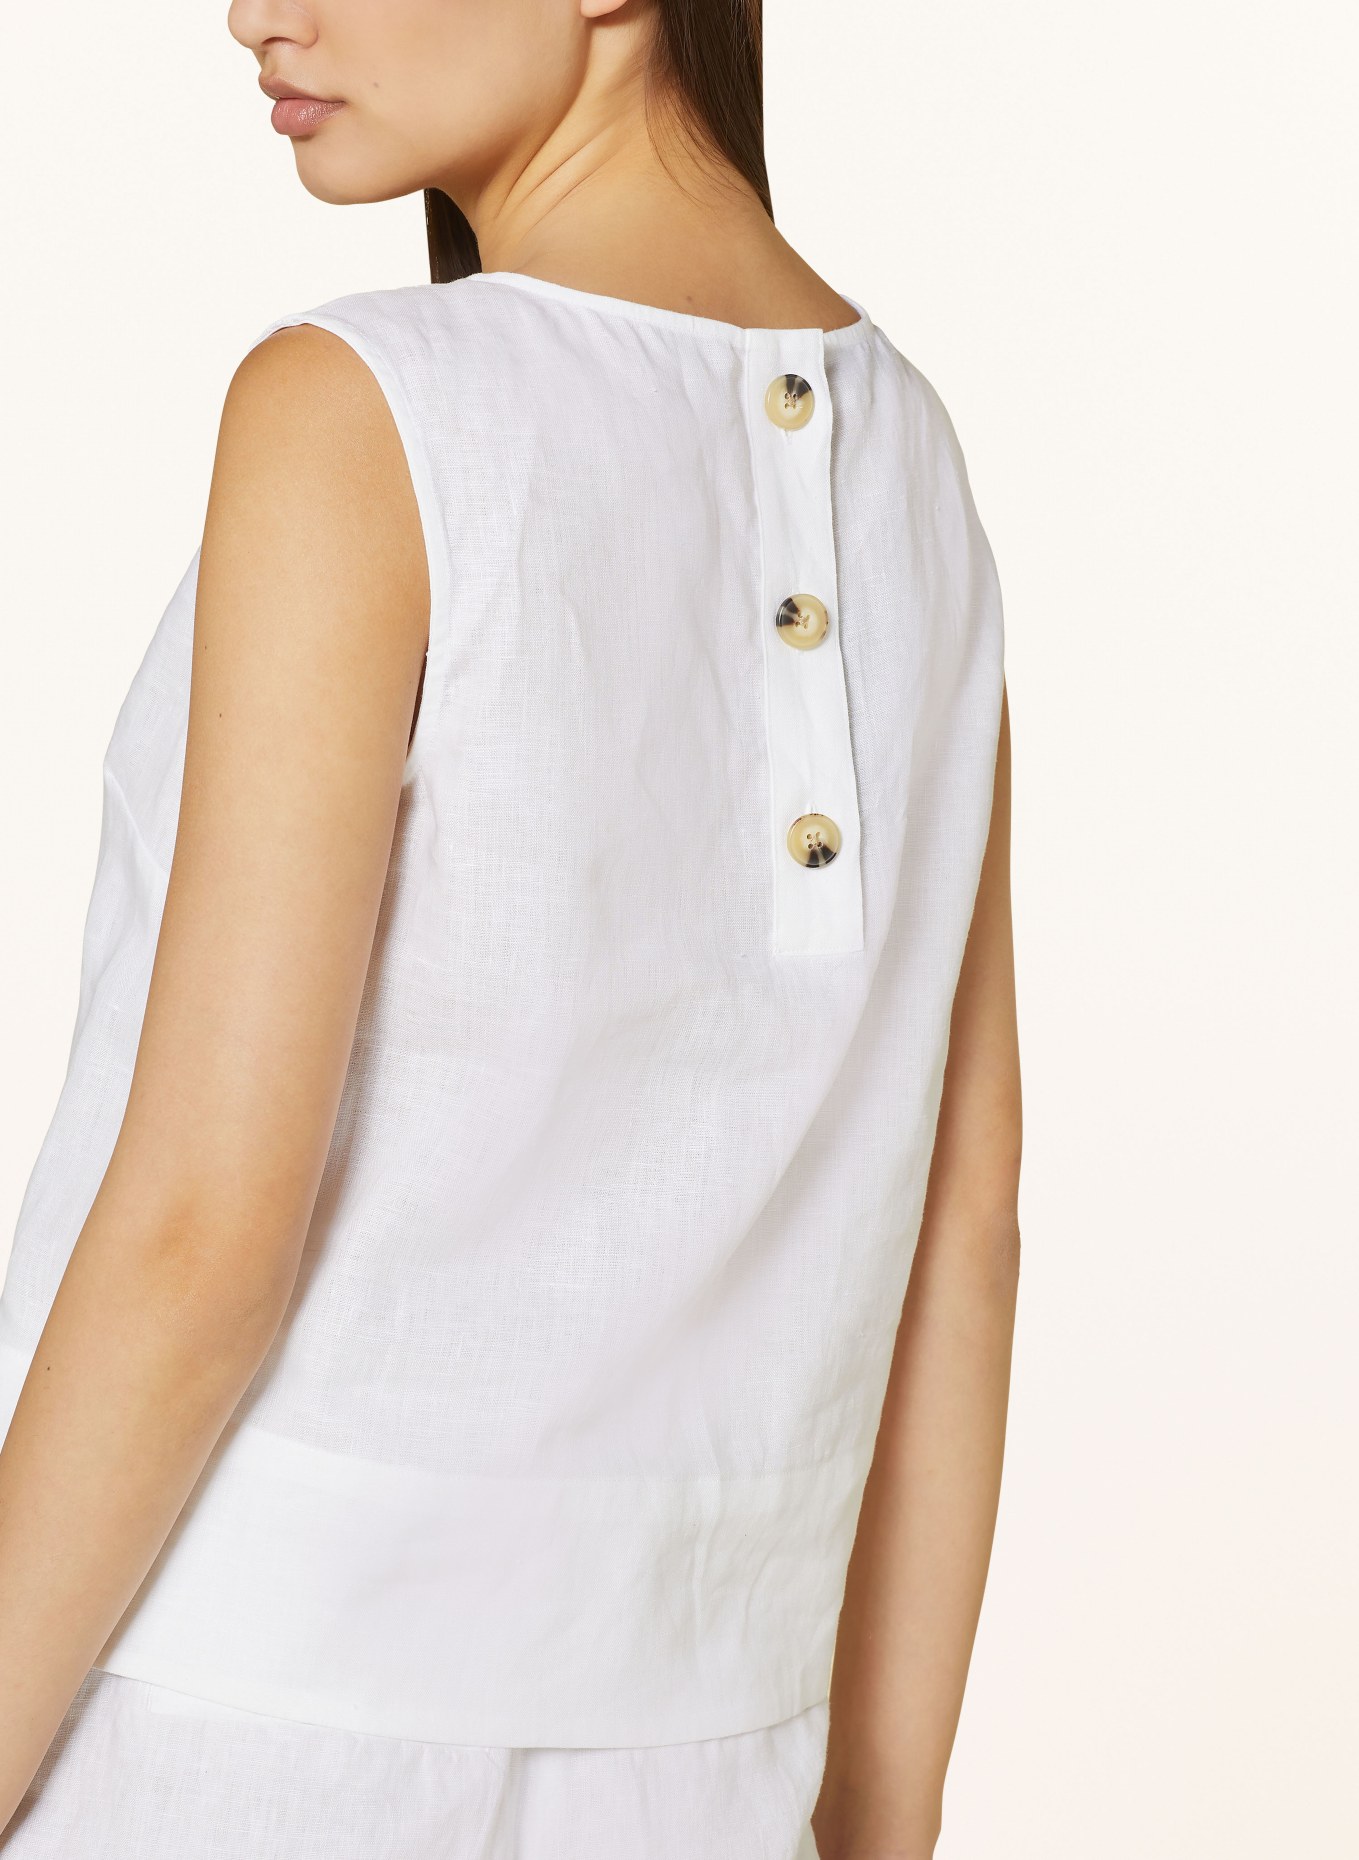 HOBBS Blouse top MALINDI in linen, Color: WHITE (Image 4)